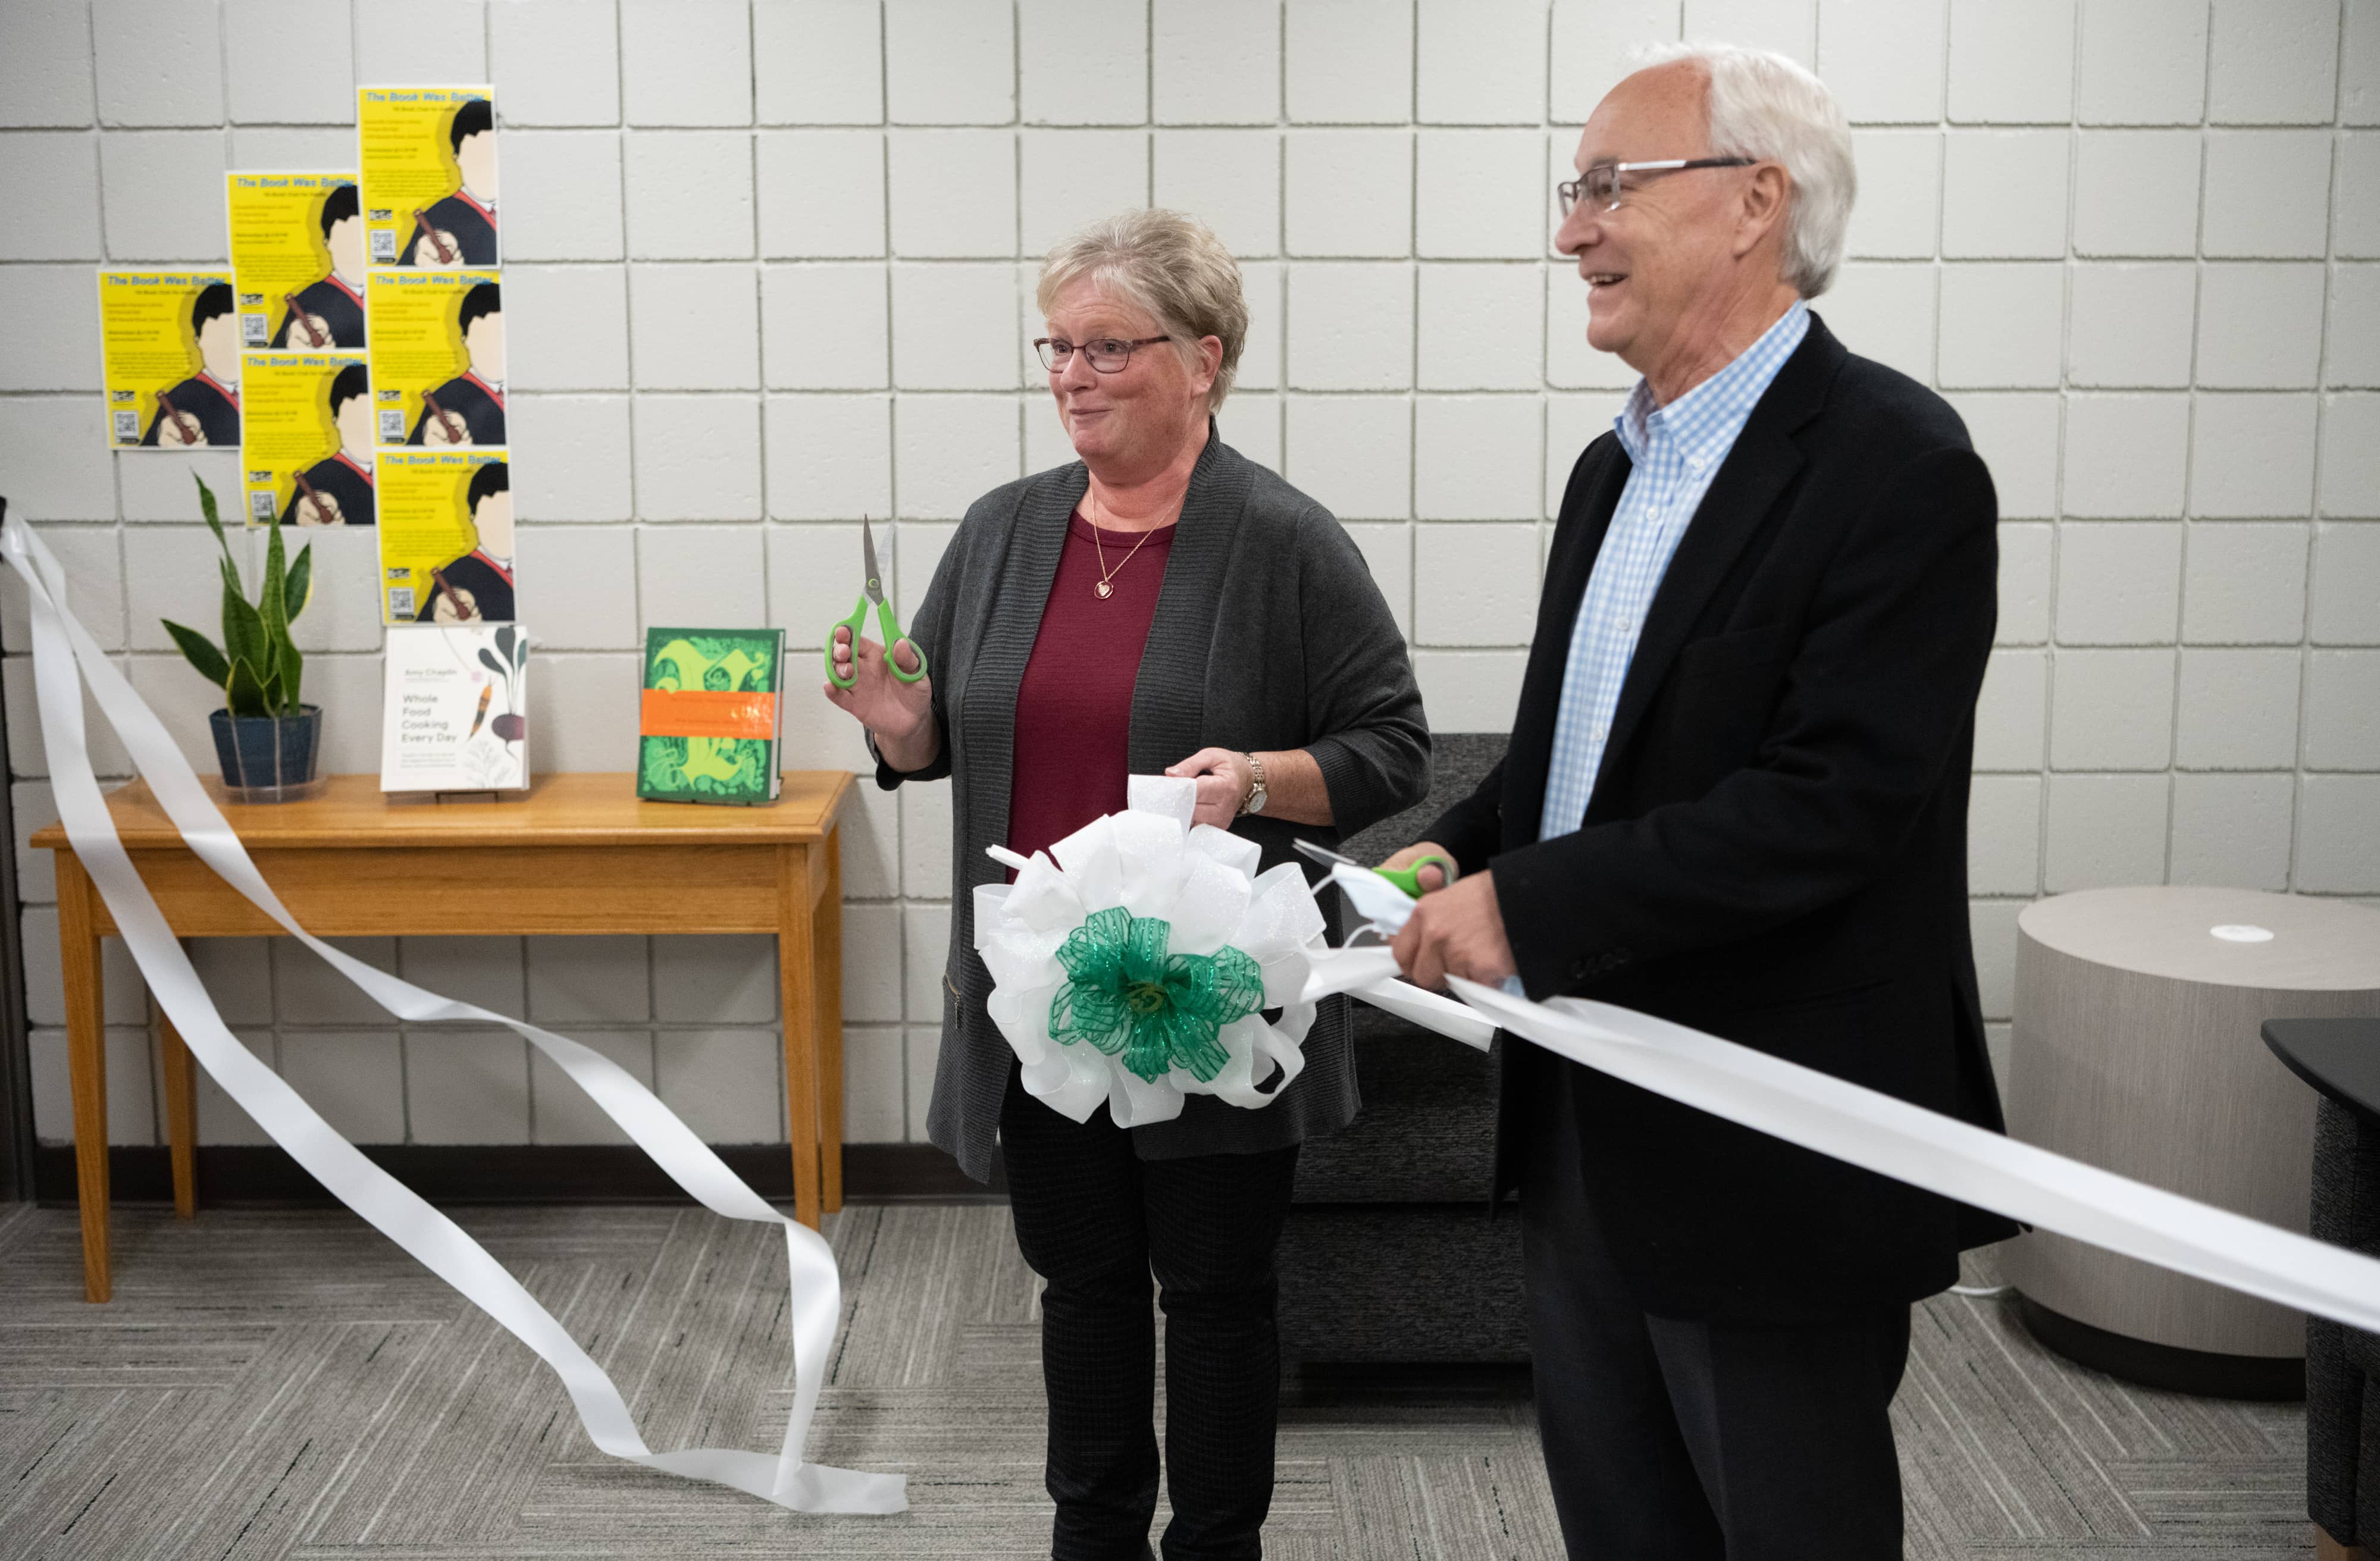 Teri Peasley, OHIO Zanesville early childhood and elementary education program coordinator, and Pres. Sherman cut the ribbon on the new Education Resource Center inside the Herrold Hall Library. Featuring over 1,400 books and other materials, the new center provides a space with resources for education students to use in field experiences, internships and course projects.